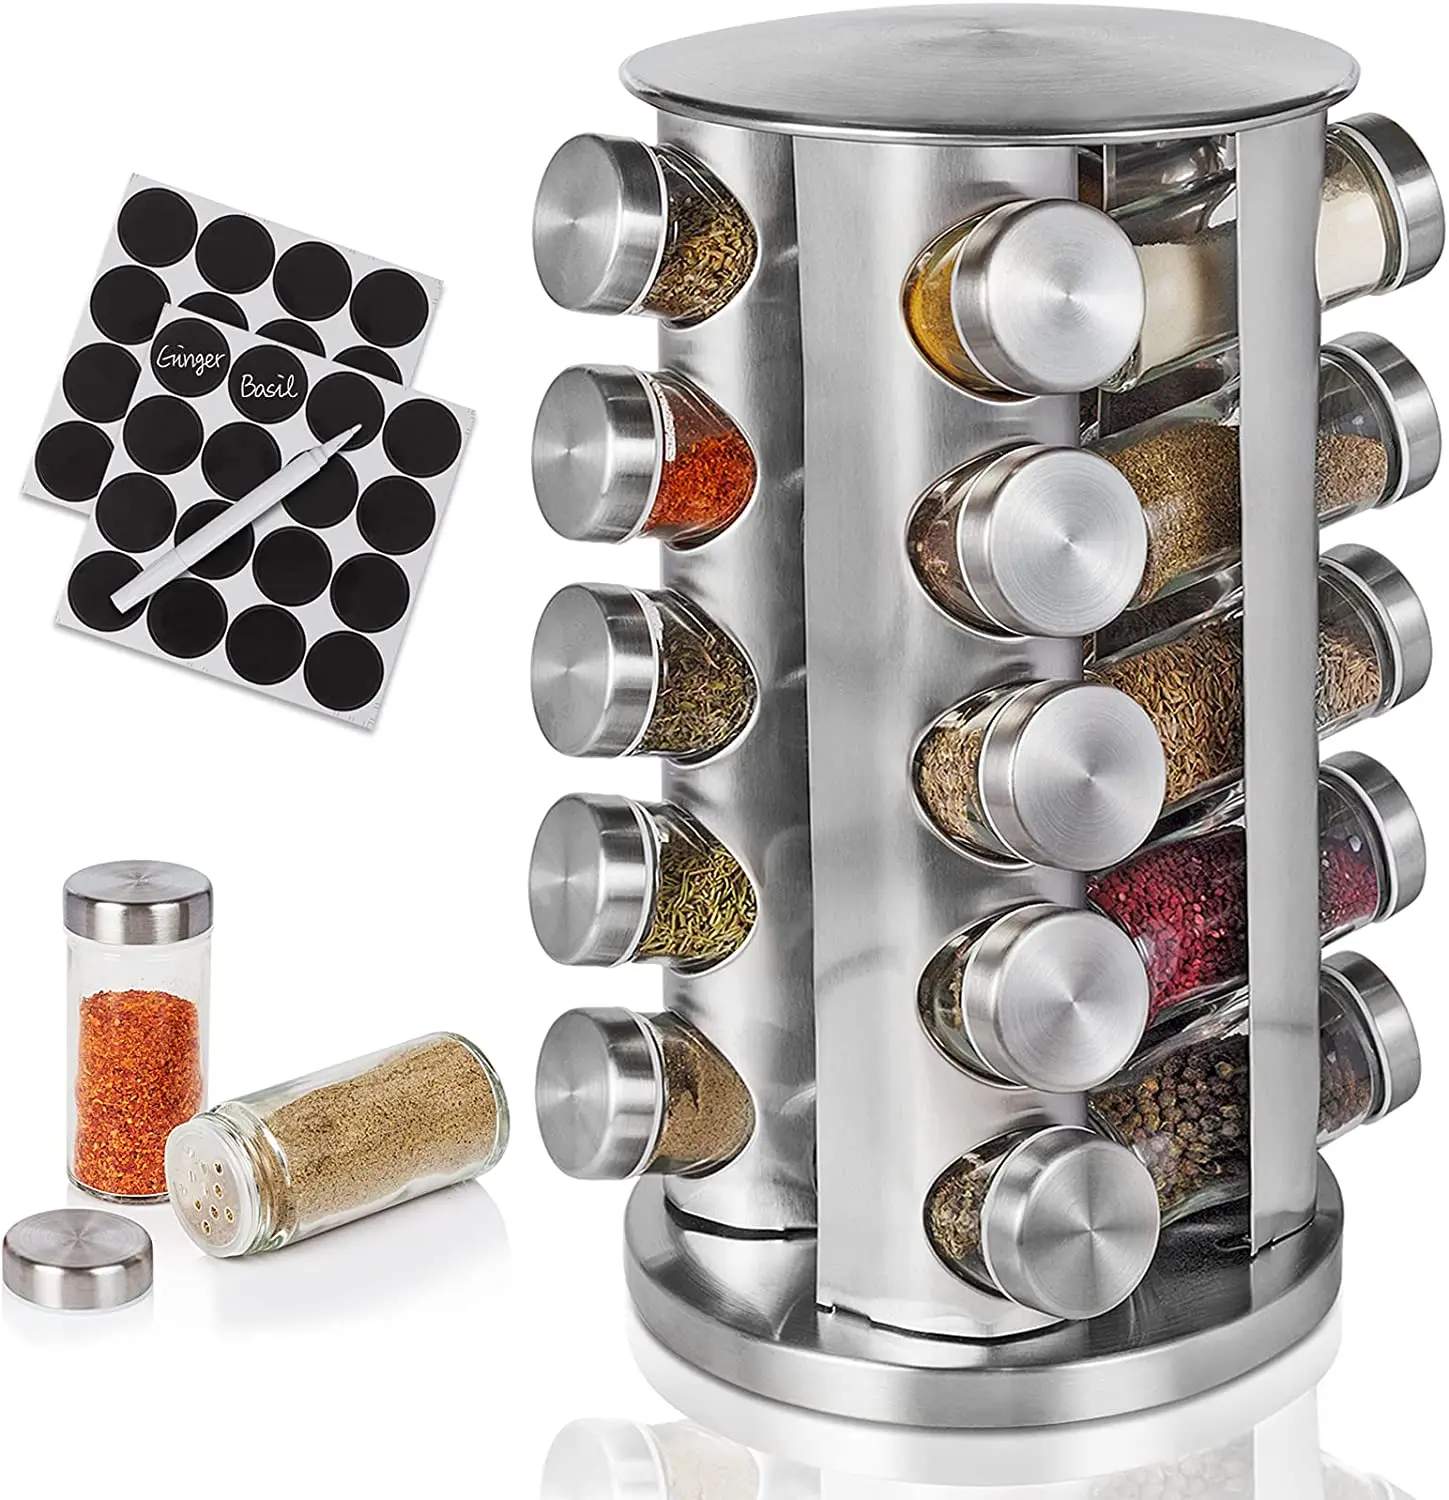 

Amazon Top Seller 20 Jars Rotating Standing Spice Rack Organizer with 32 Reusable Labels and 1 Mark Pen, Black, silver or customized